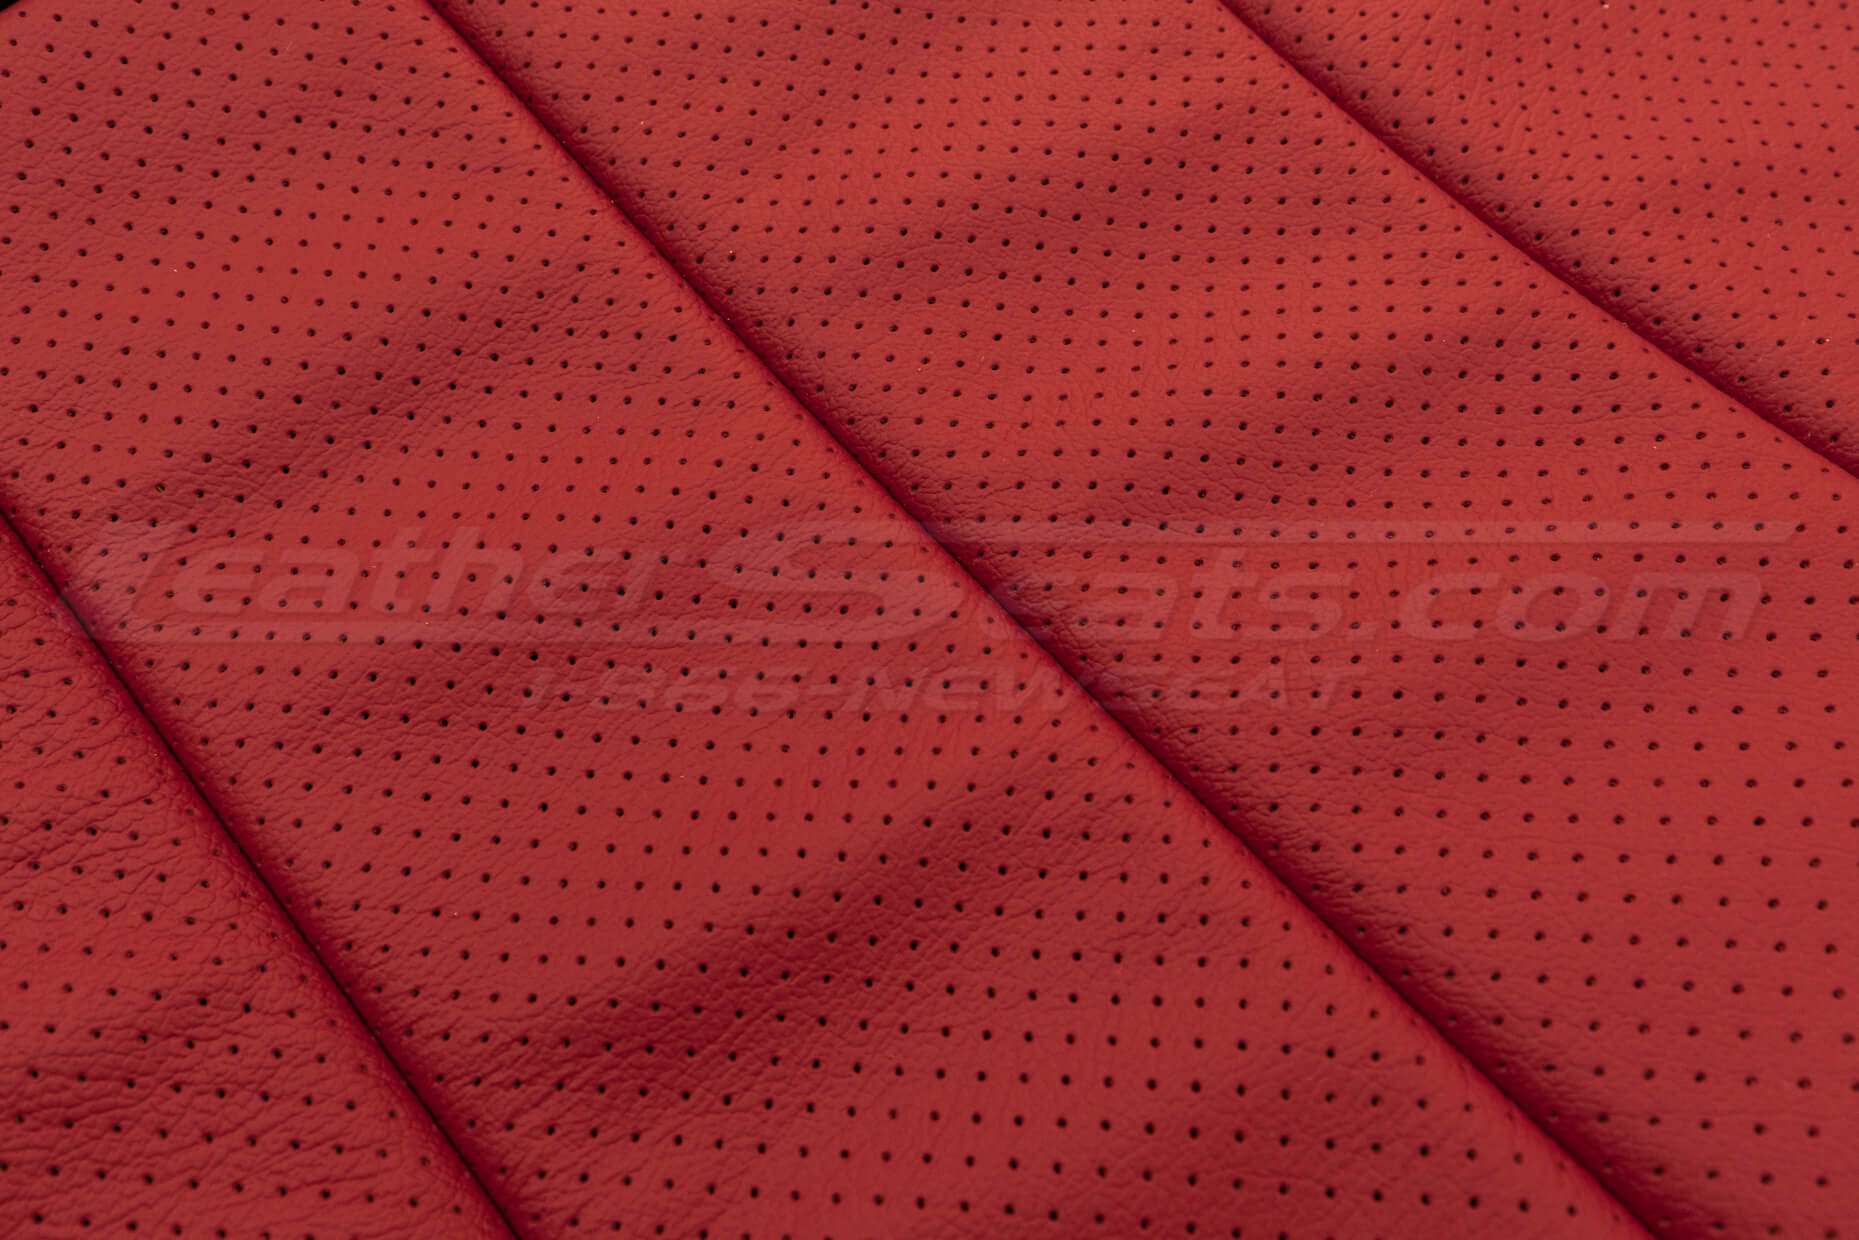 Red perforation close-up